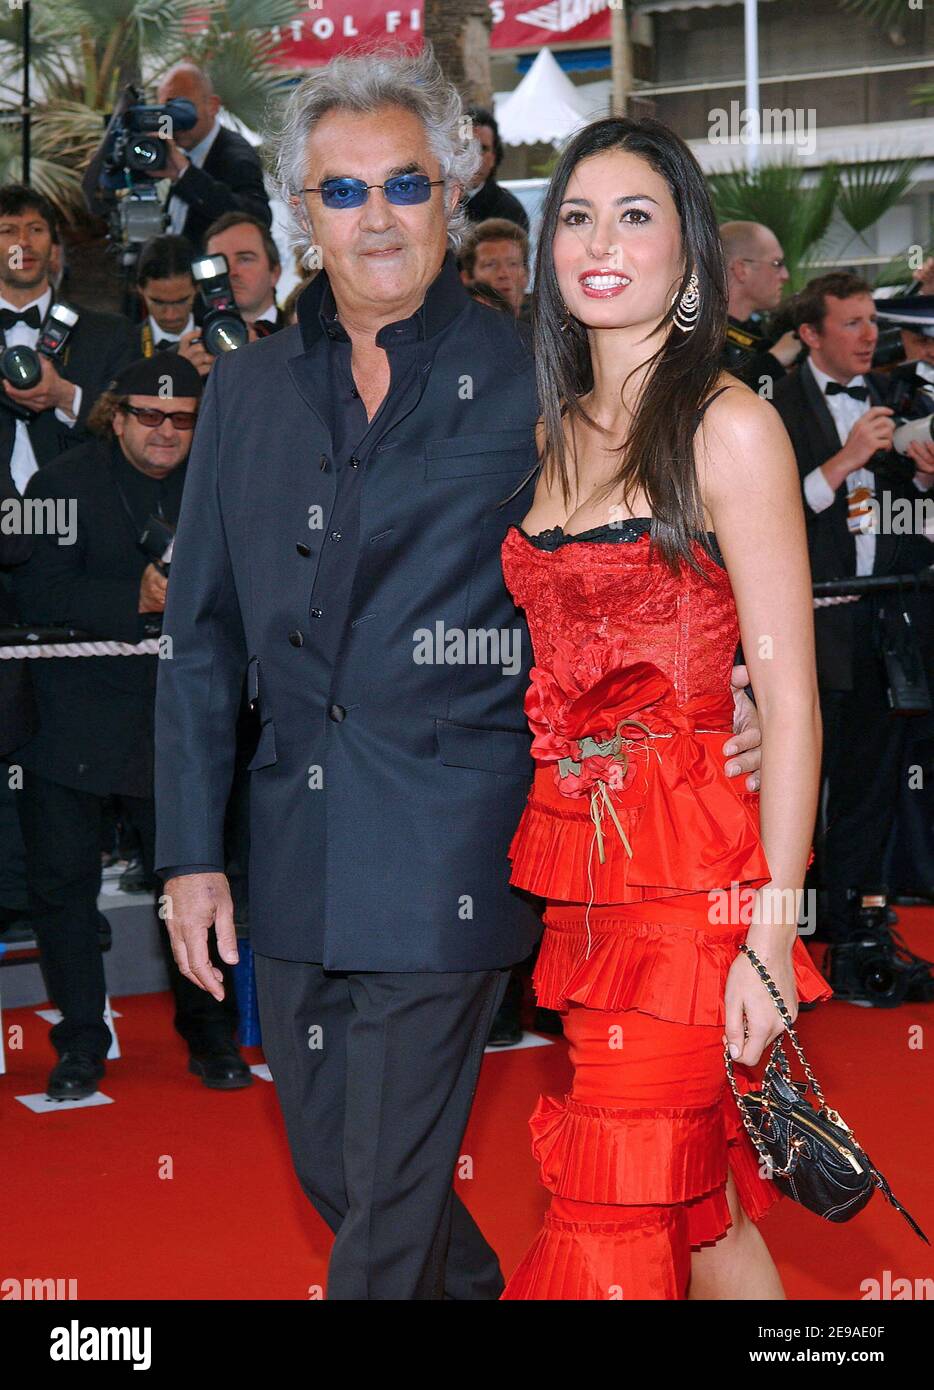 Renault Formula One managing director, Italian Flavio Briatore, and his girlfriend Elisabetta Gregoraci upon arrival for the screening of Mexican director Alejandro Gonzalez Inarritu's film, 'Babel', at the 59th Cannes Film Festival in Cannes, France, on May 23, 2006. Photo by Hahn-Nebinger-Orban/ABACAPRESS.COM Stock Photo